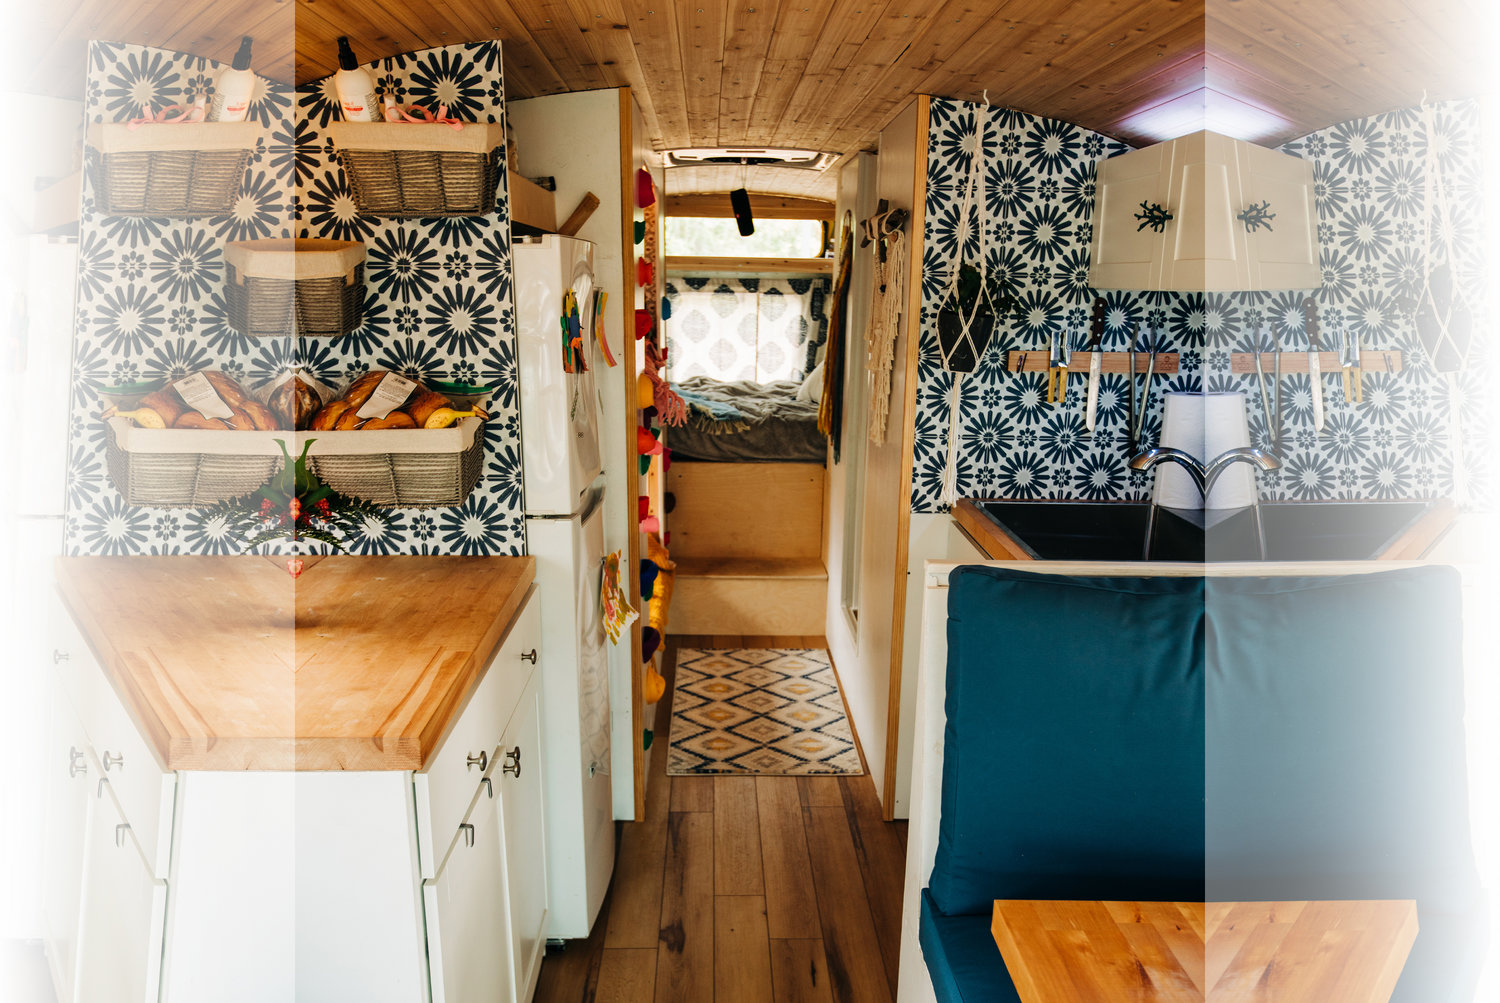 Natural textures and patterned accents infuse warmth to the bus interior